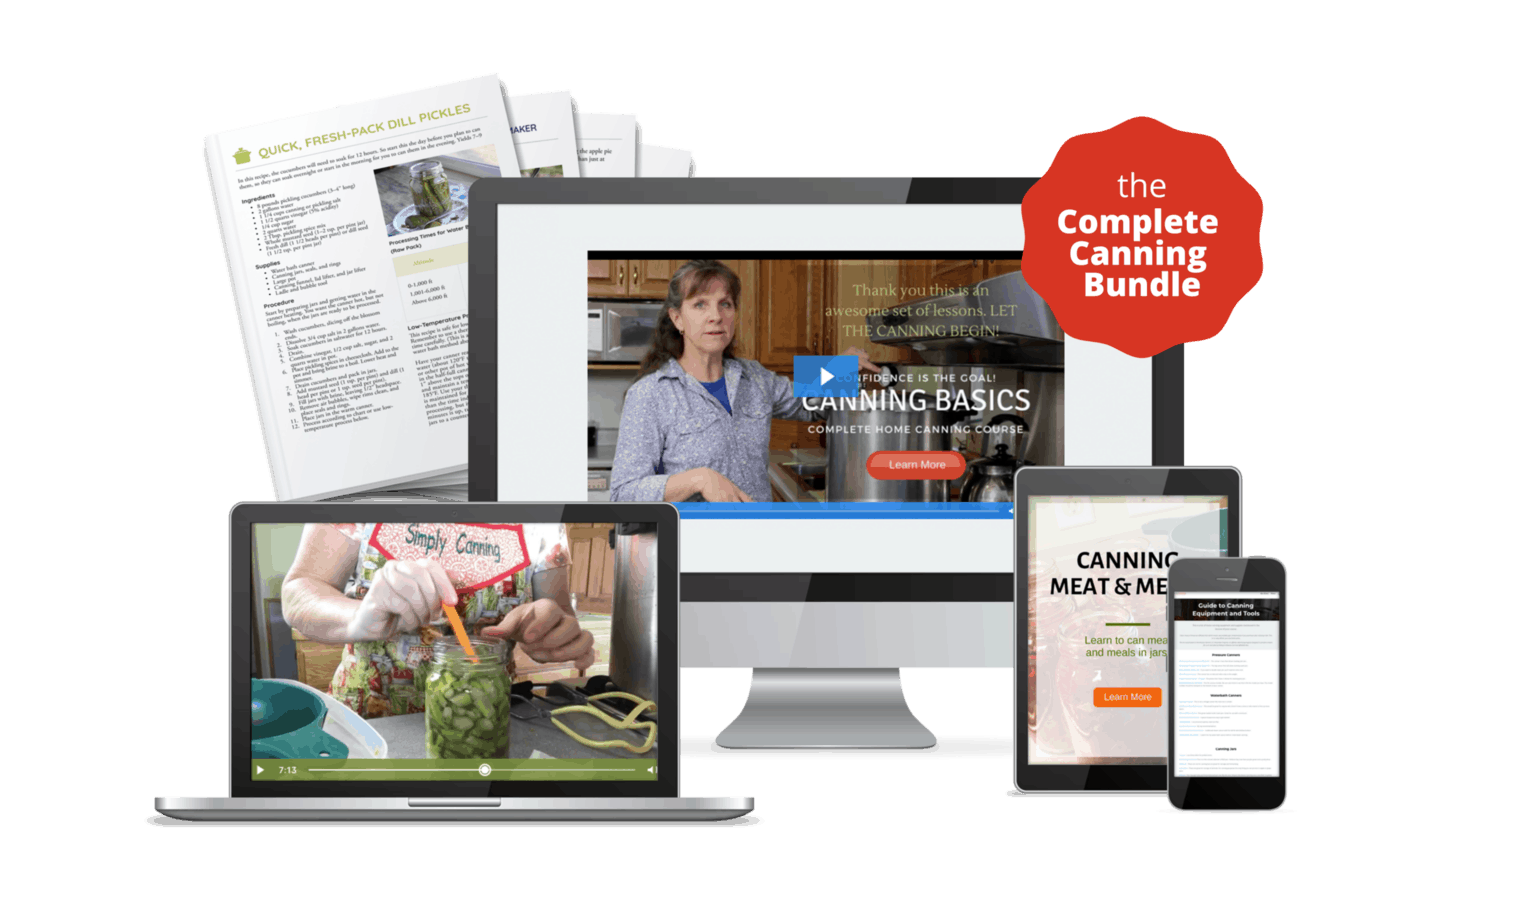 The complete canning bundle with videos and recipes available on multiple devices.